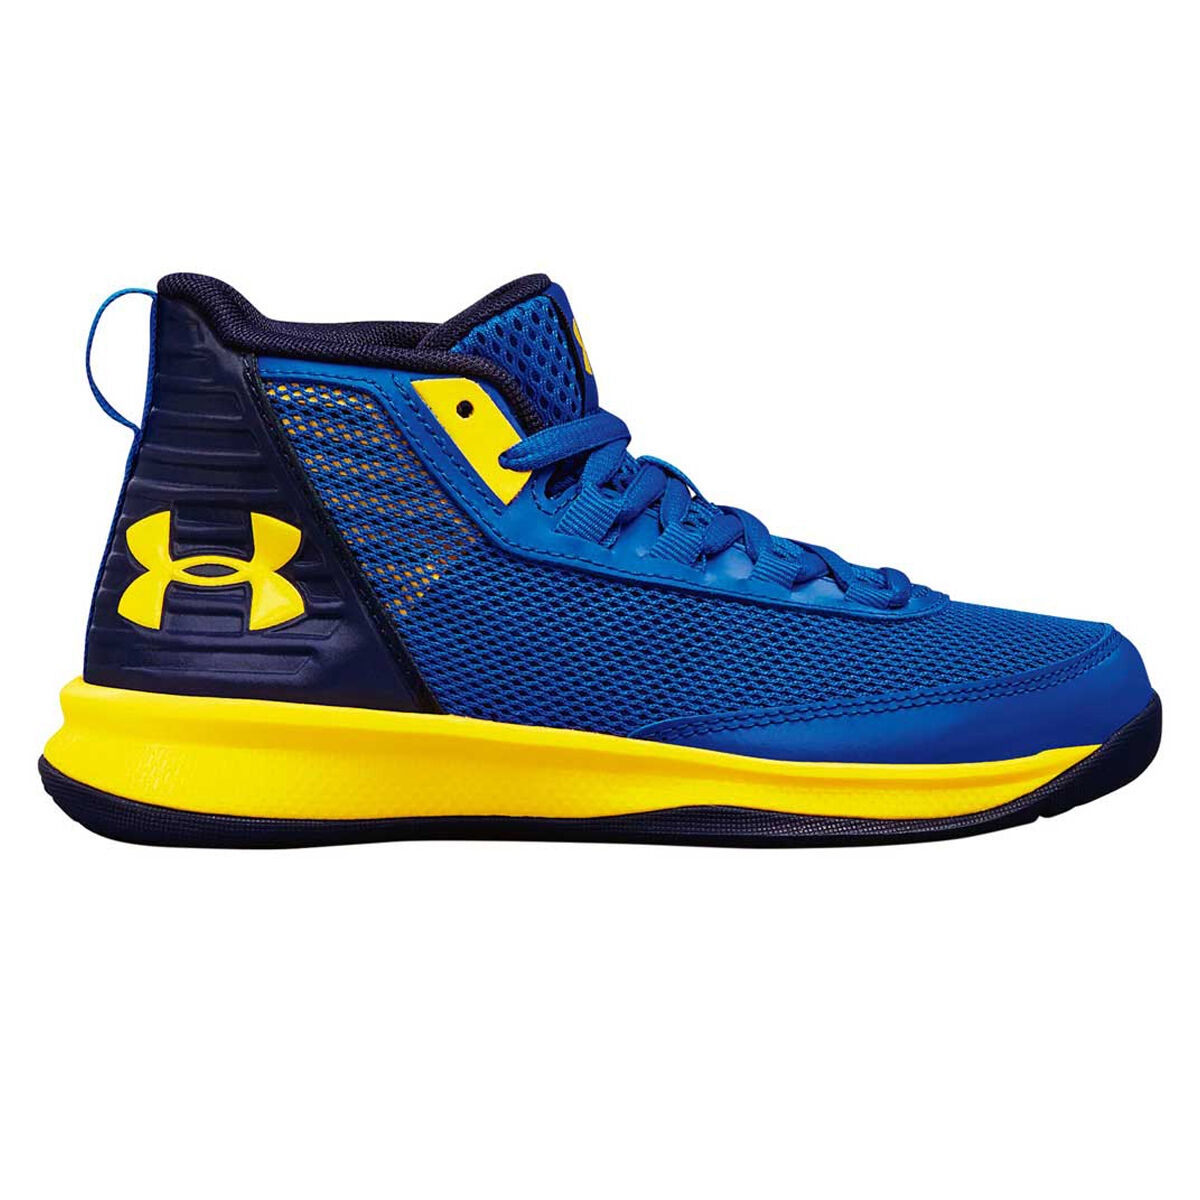 under armour basketball shoes rebel